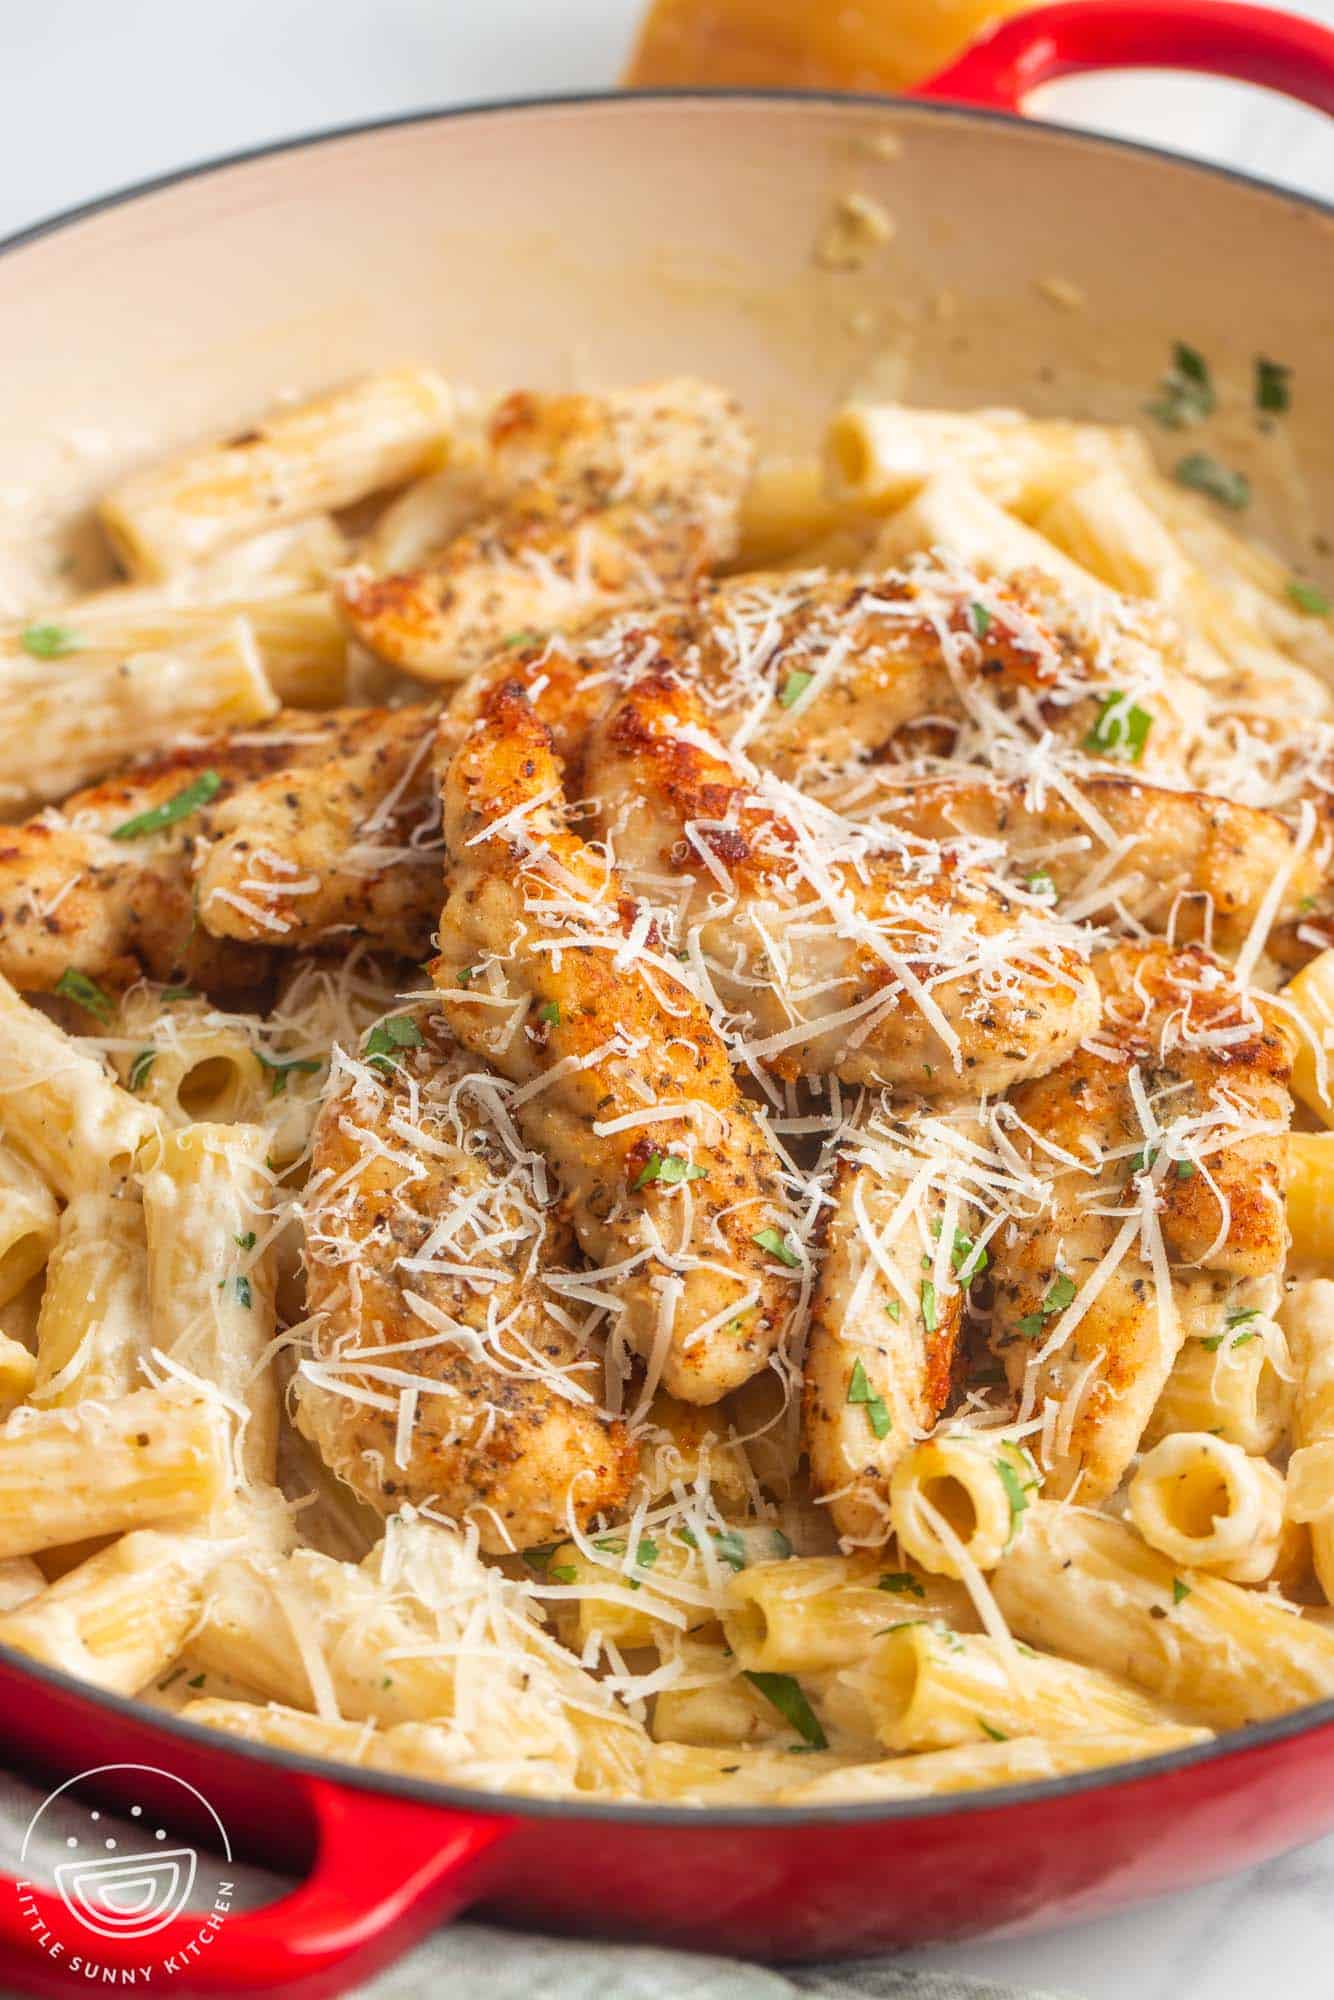 a red enameled skillet of parmesan chicken tenderloins over creamy ziti pasta. The dish is topped with fresh parsley and grated cheese.